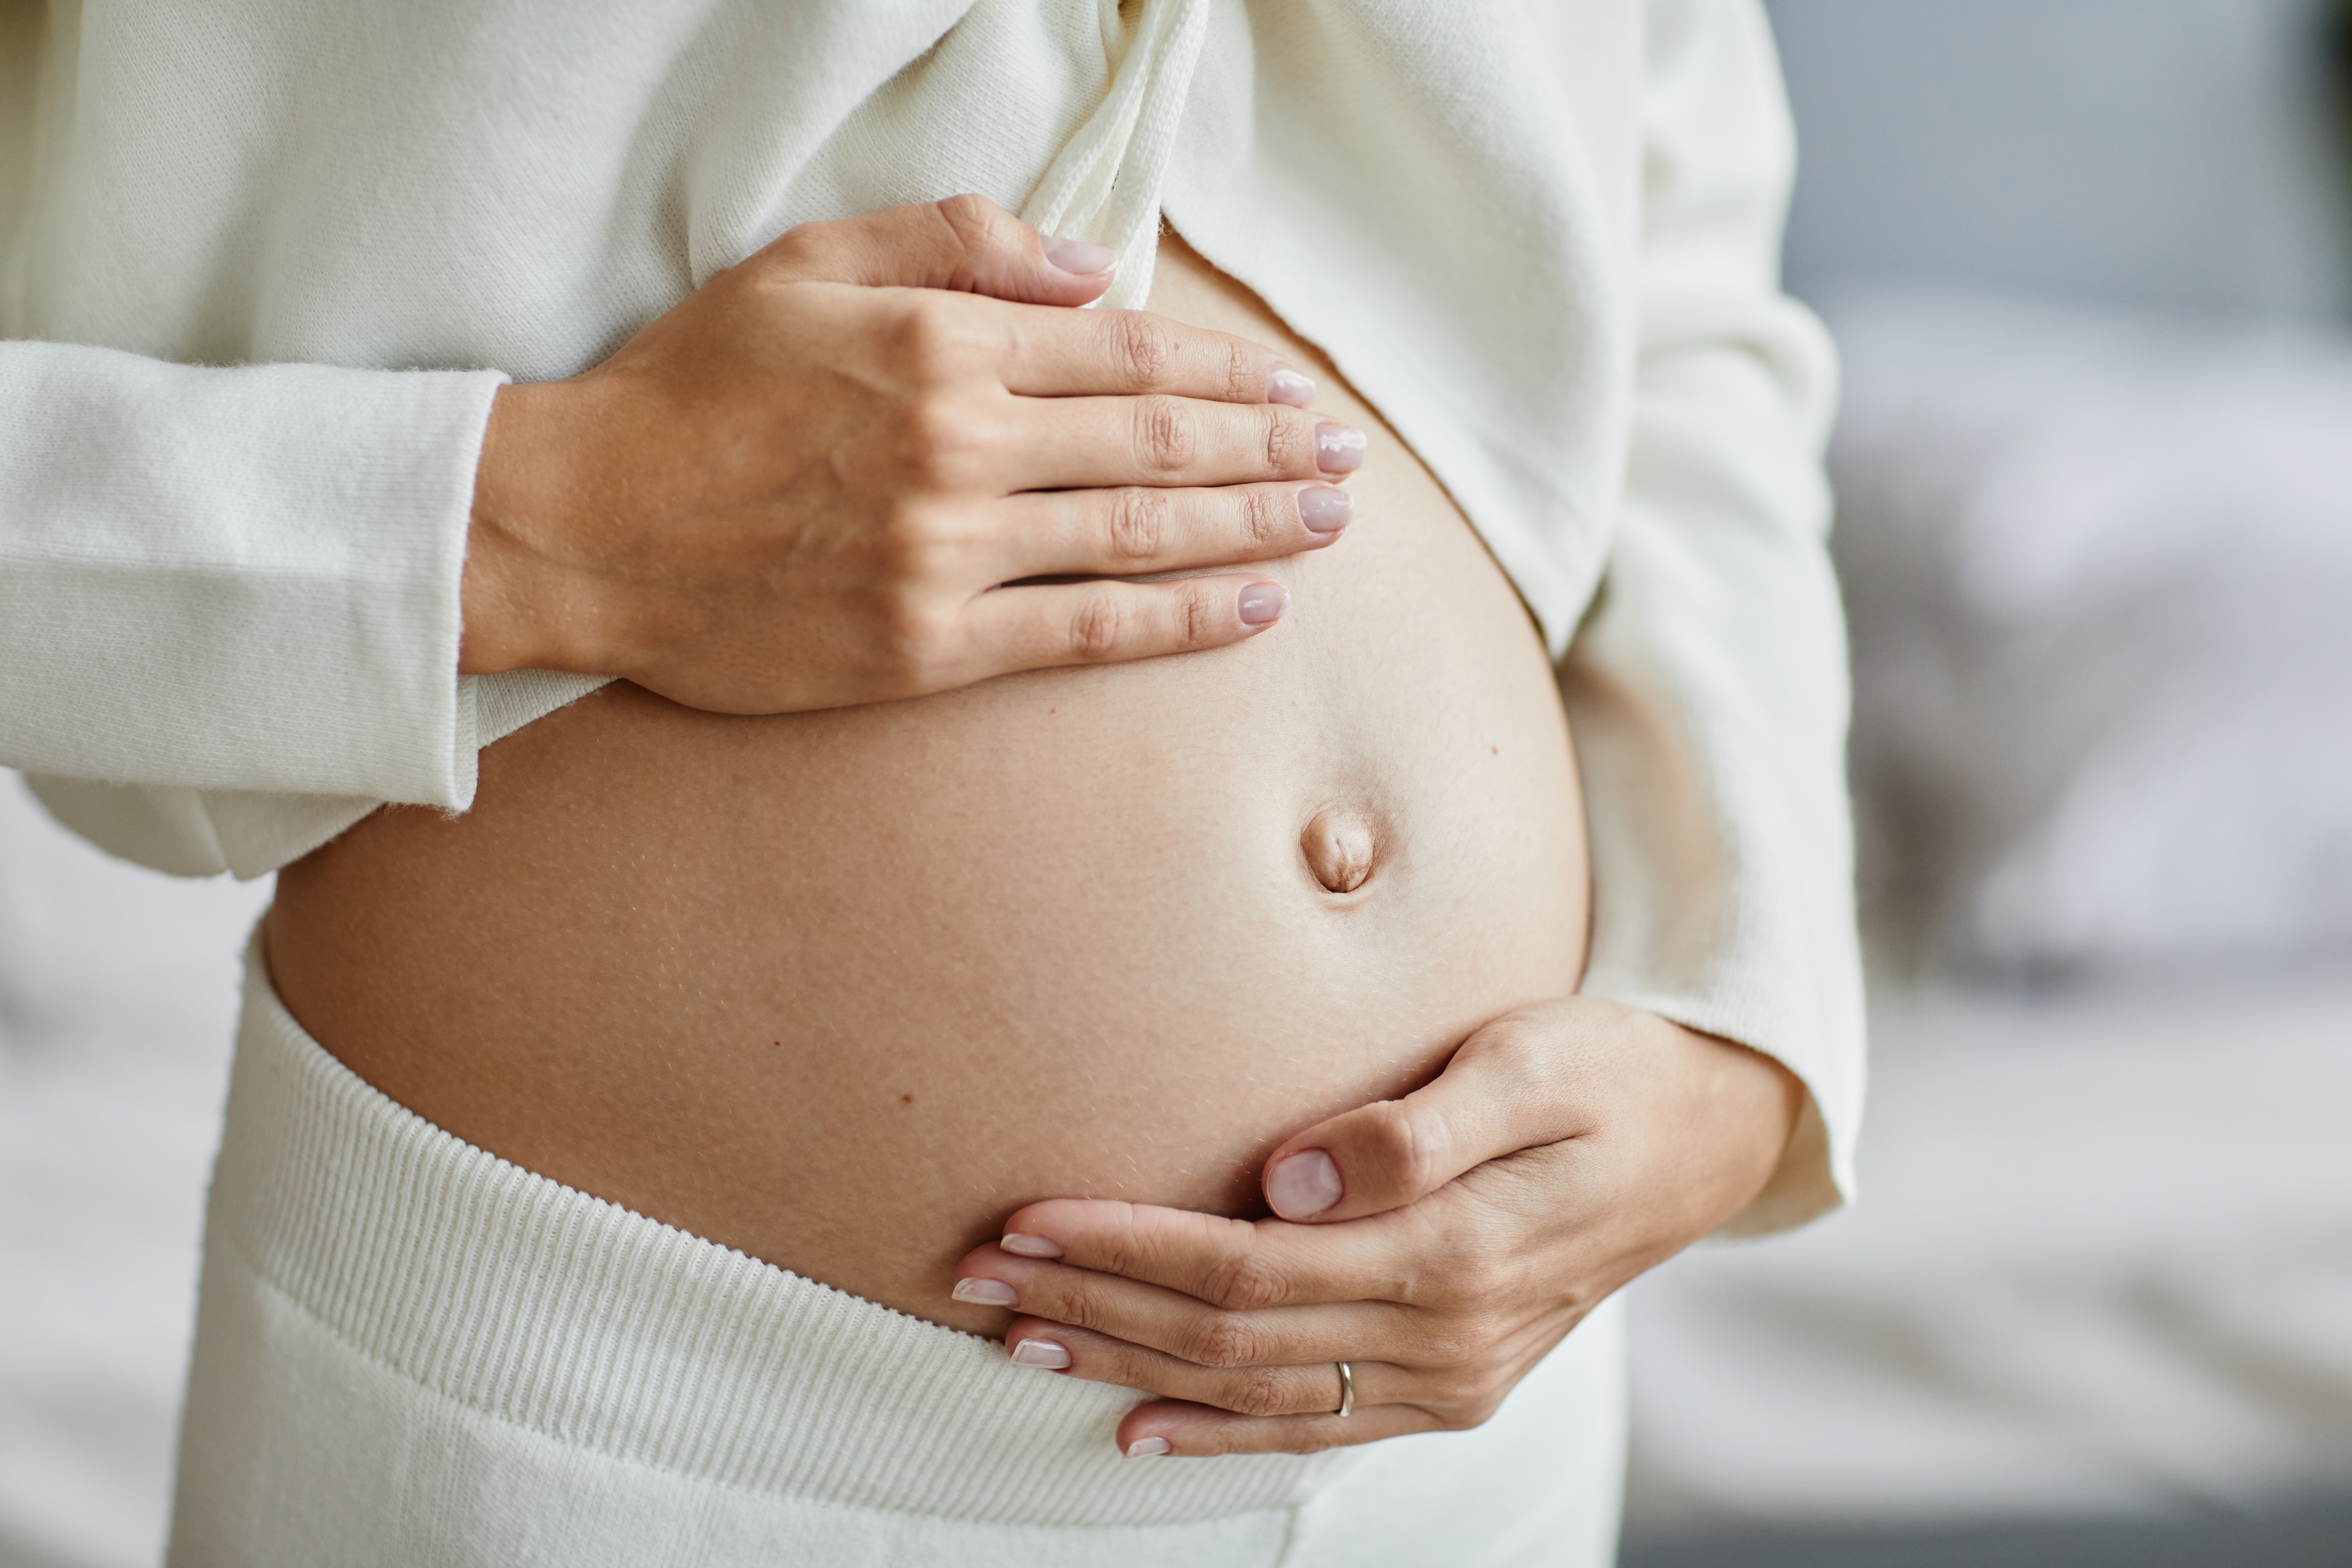 Pregnant woman holding her belly | Source: Shutterstock